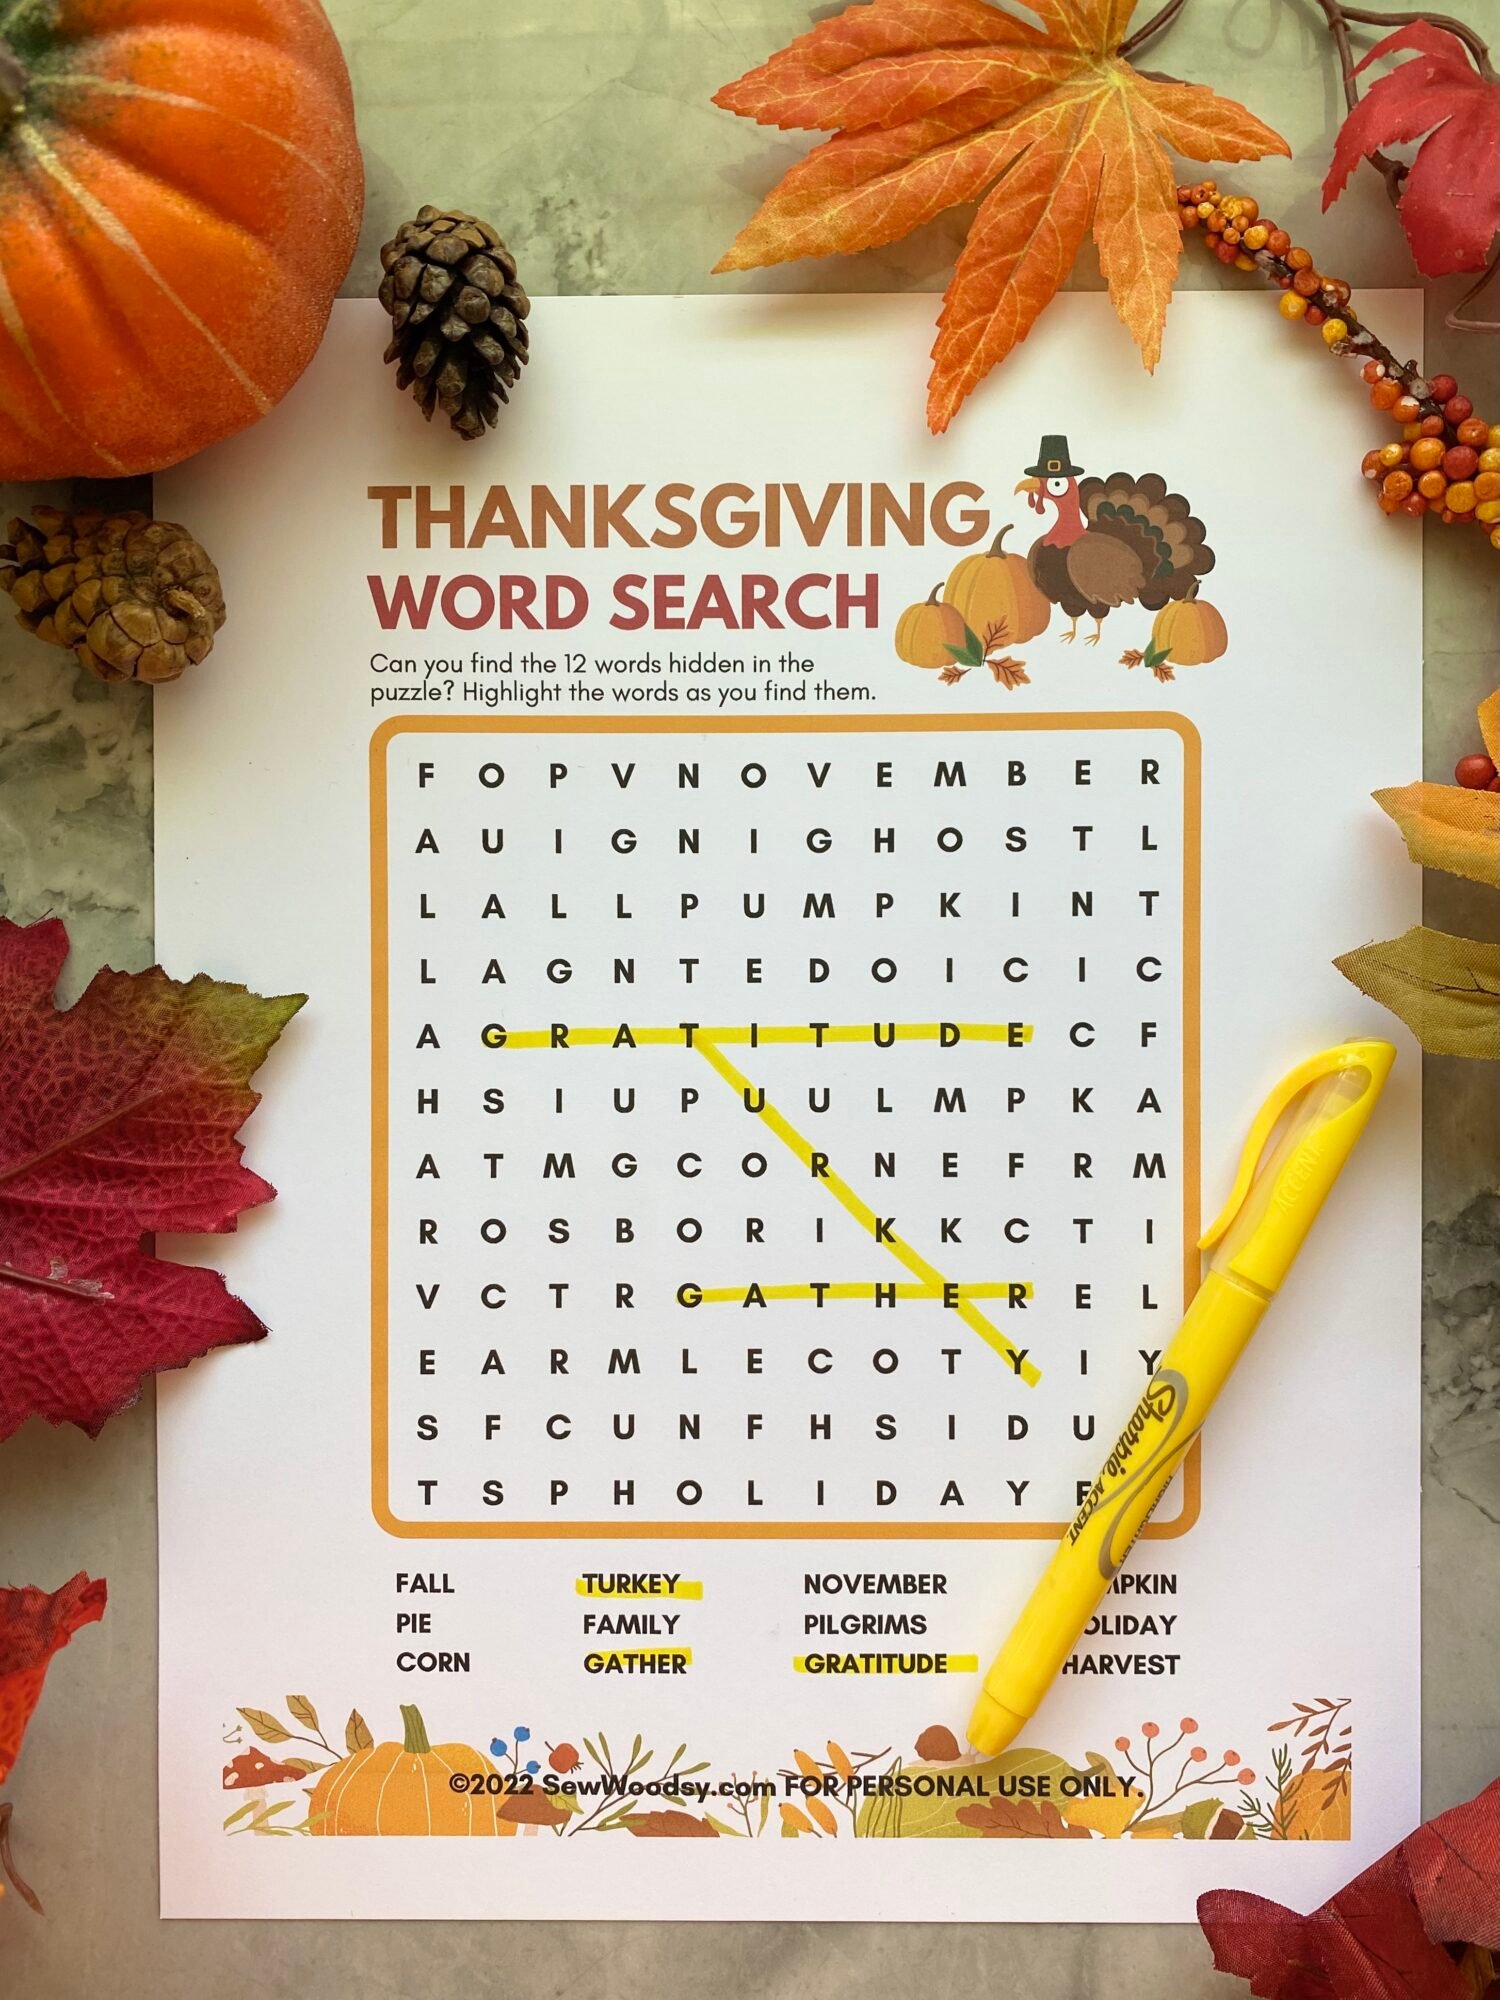 White print out paper of a wordsearch with a pumpkin and fall leaves next to it.